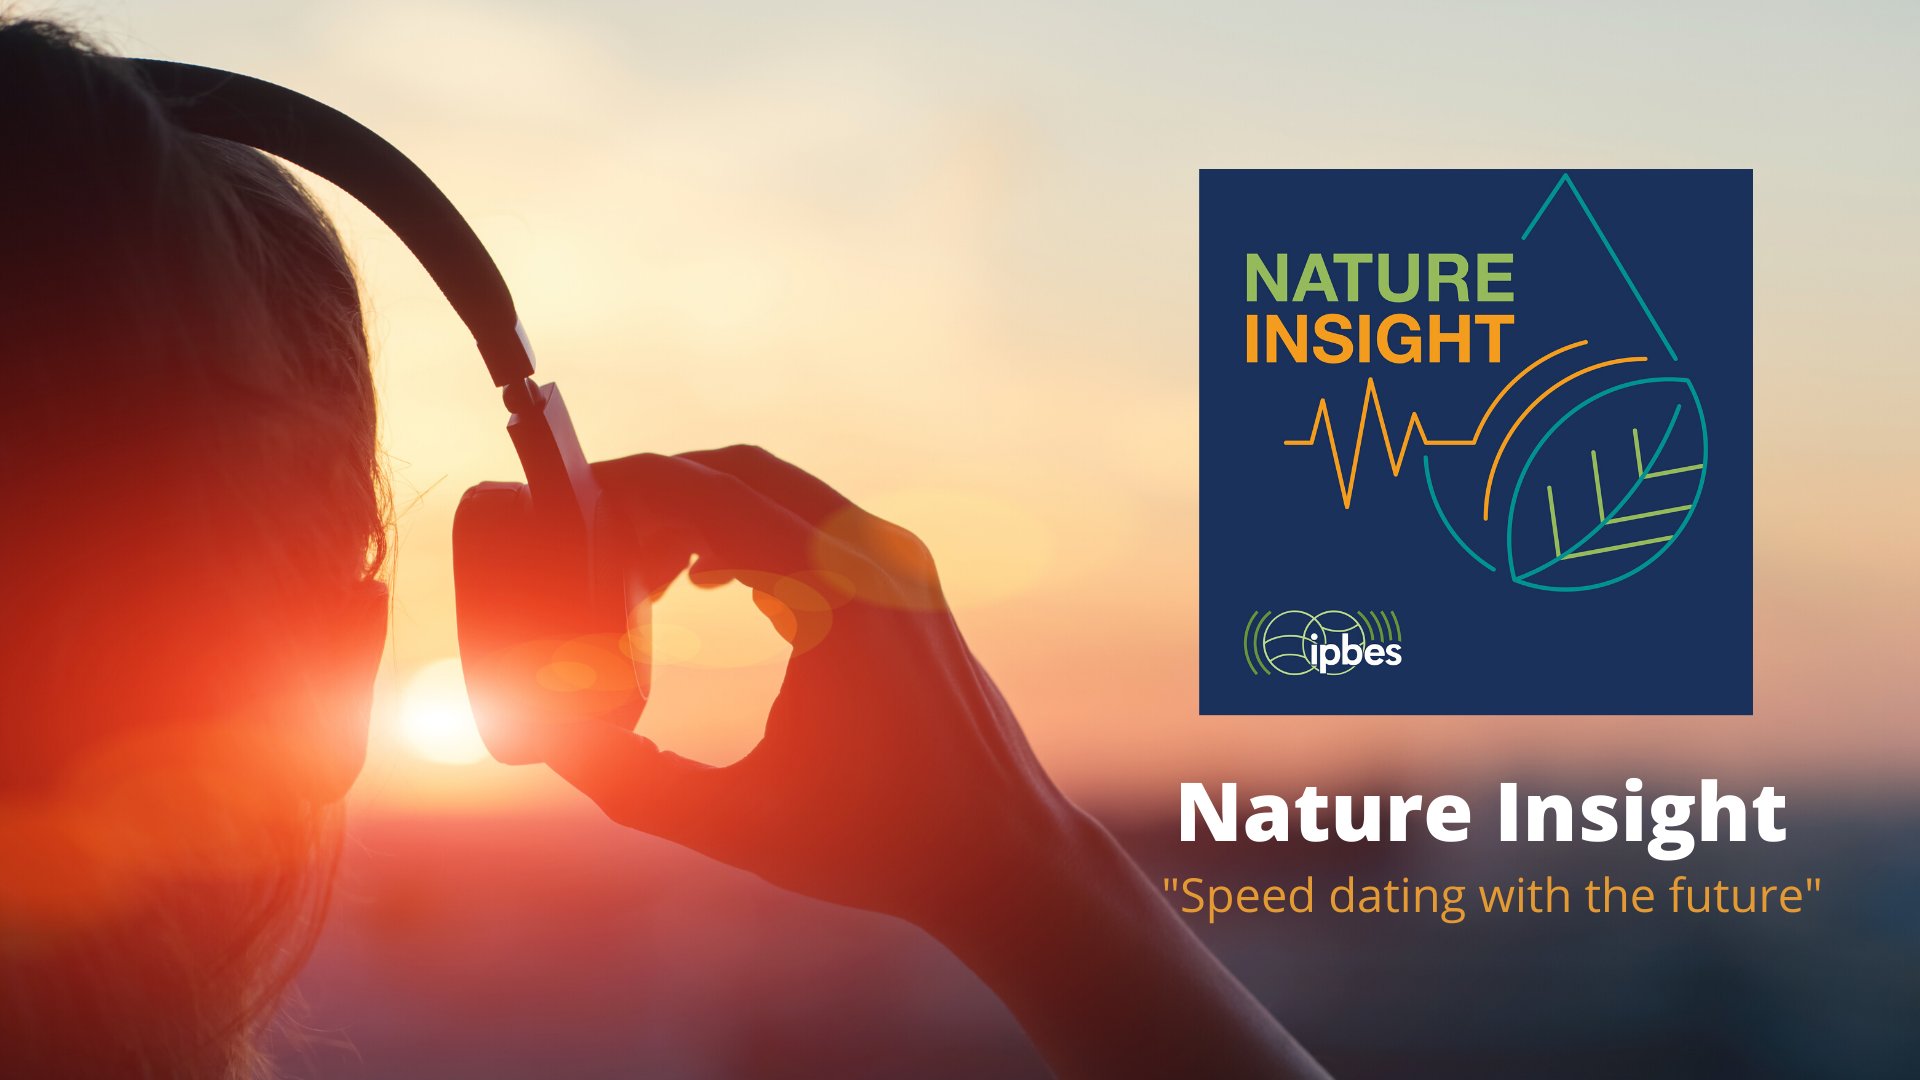 bus spejder champion ipbes on Twitter: "Have you heard? 🎧 🔊 @IPBES is launching a new podcast:  "Nature Insight - Speed Dating with the Future" on Wednesday 8 July 🌿  #IPBESPod #SpeedDatingWithTheFuture Listen to the